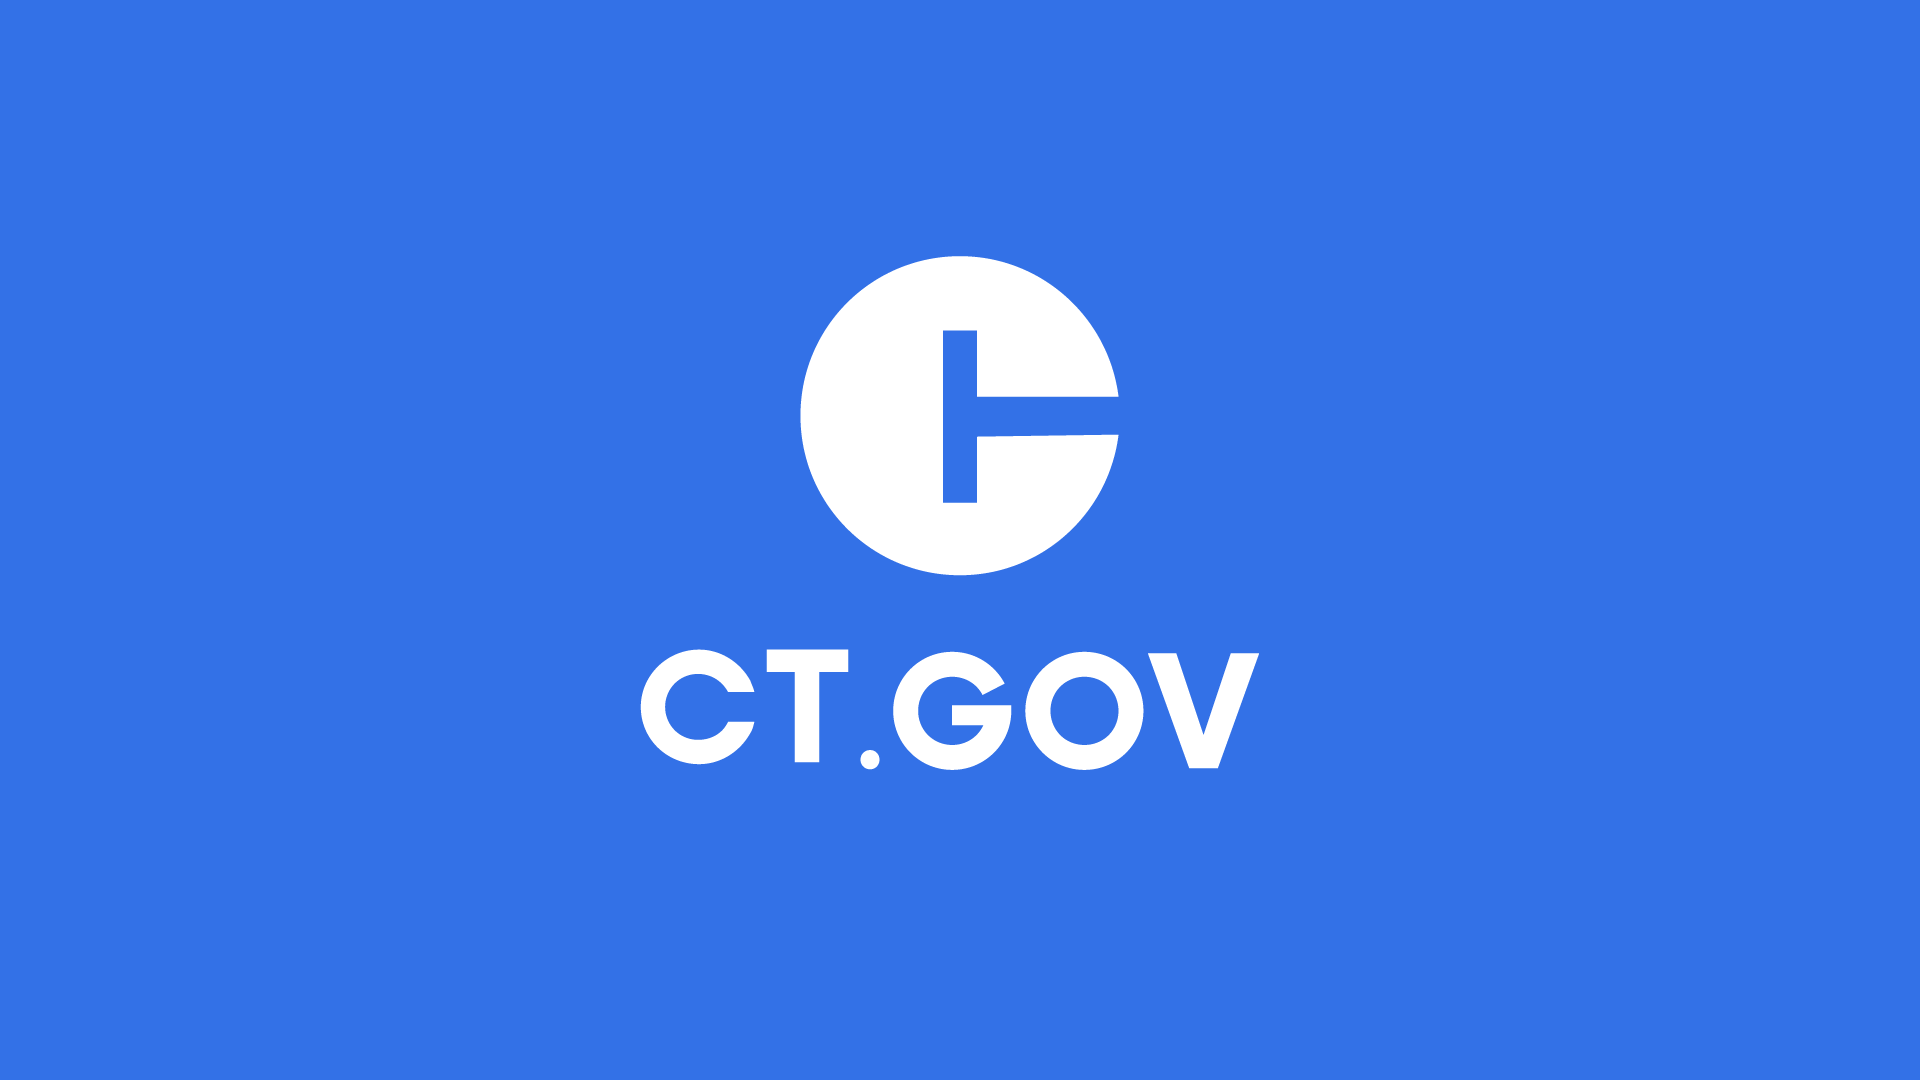 Governor Lamont Announces Seven New Technology Education Programs at Connecticut’s Public and Private Colleges and Universities